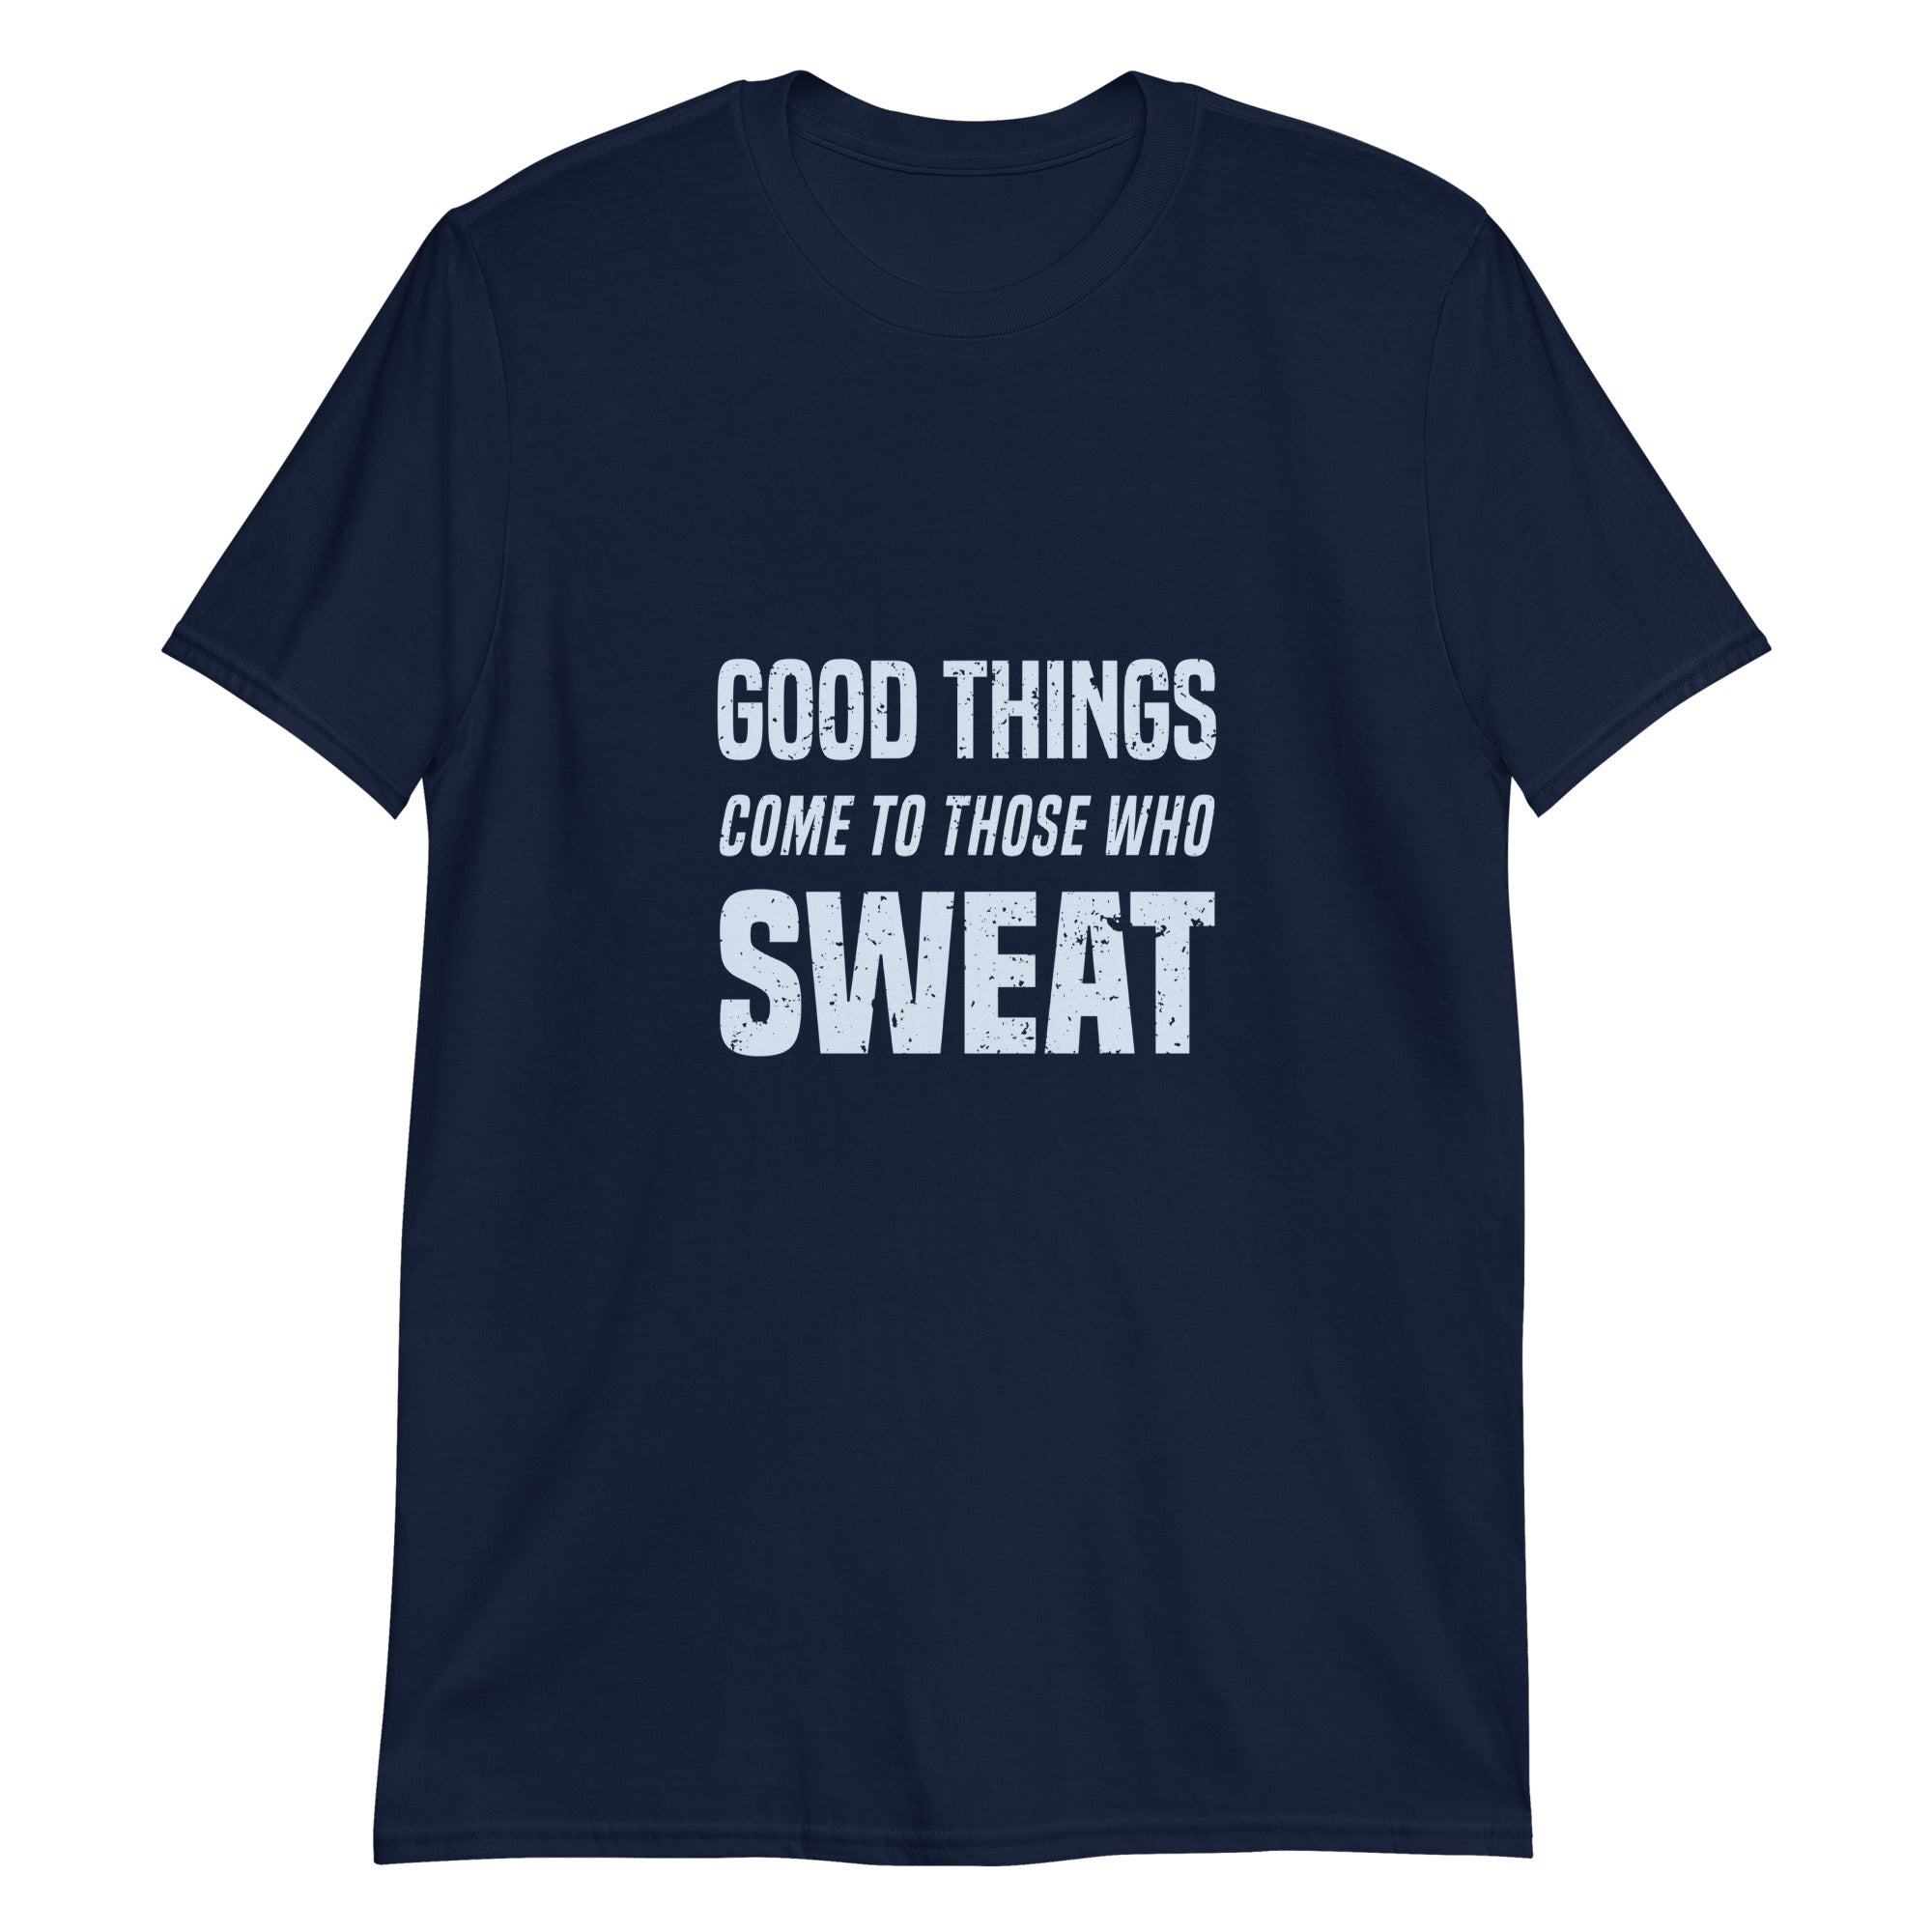 Good things come to those who sweat